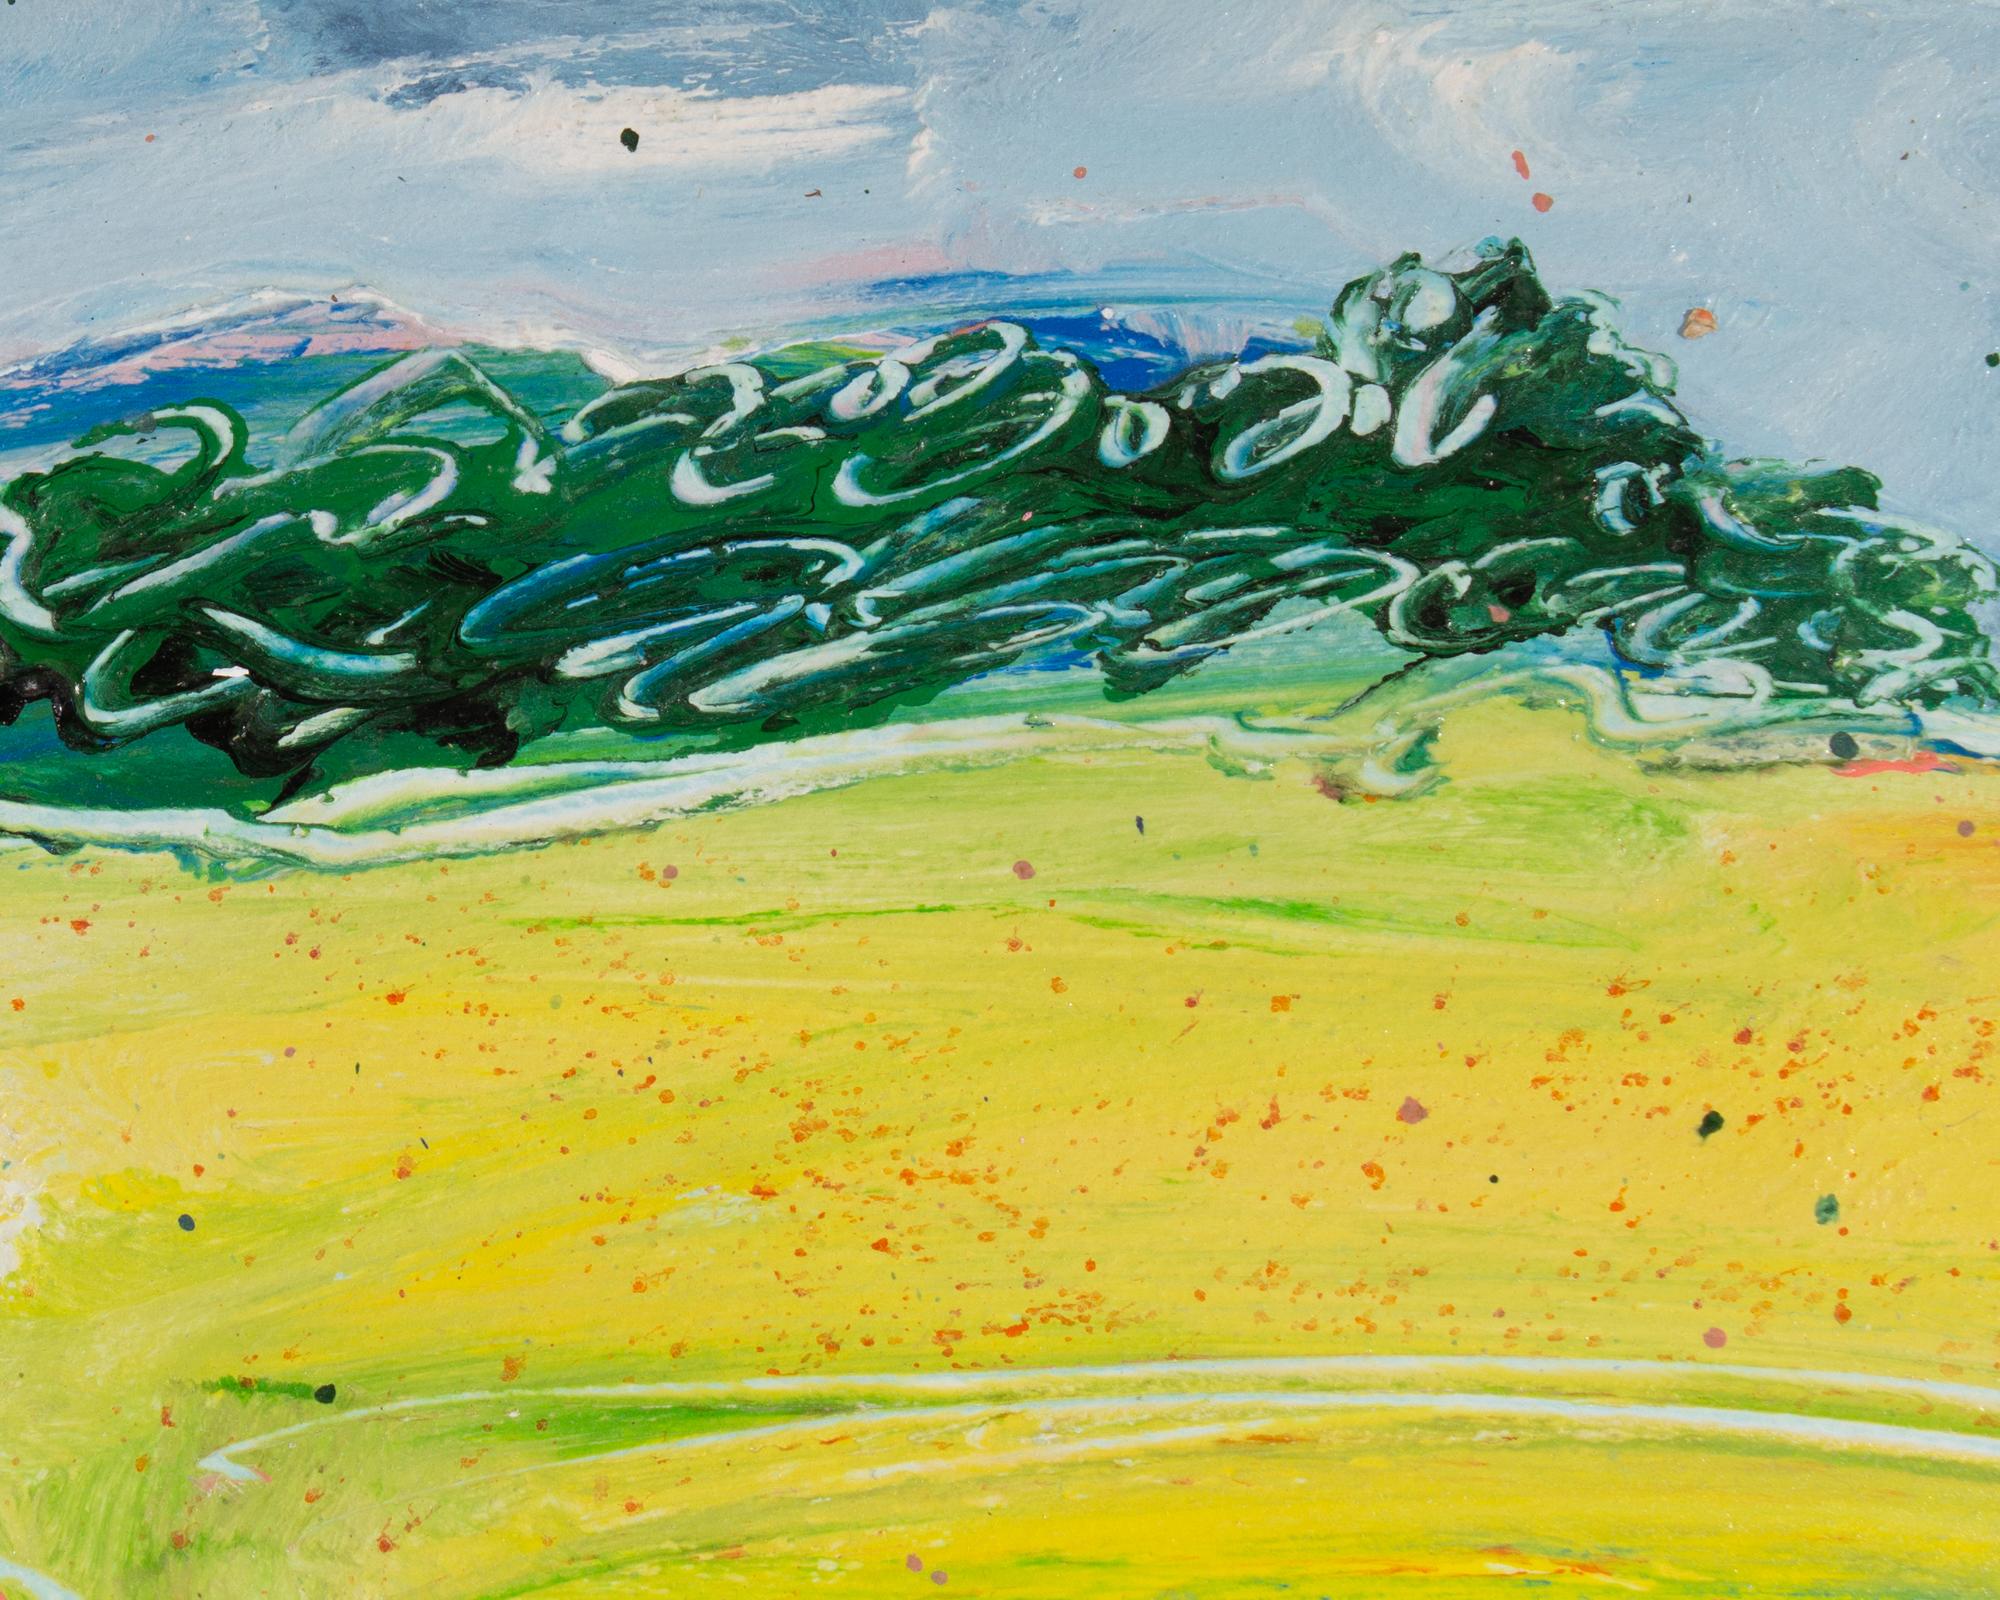 American Harry Hilson Signed 1980s “Spring Landscape” Abstract Acrylic on Paper Painting For Sale